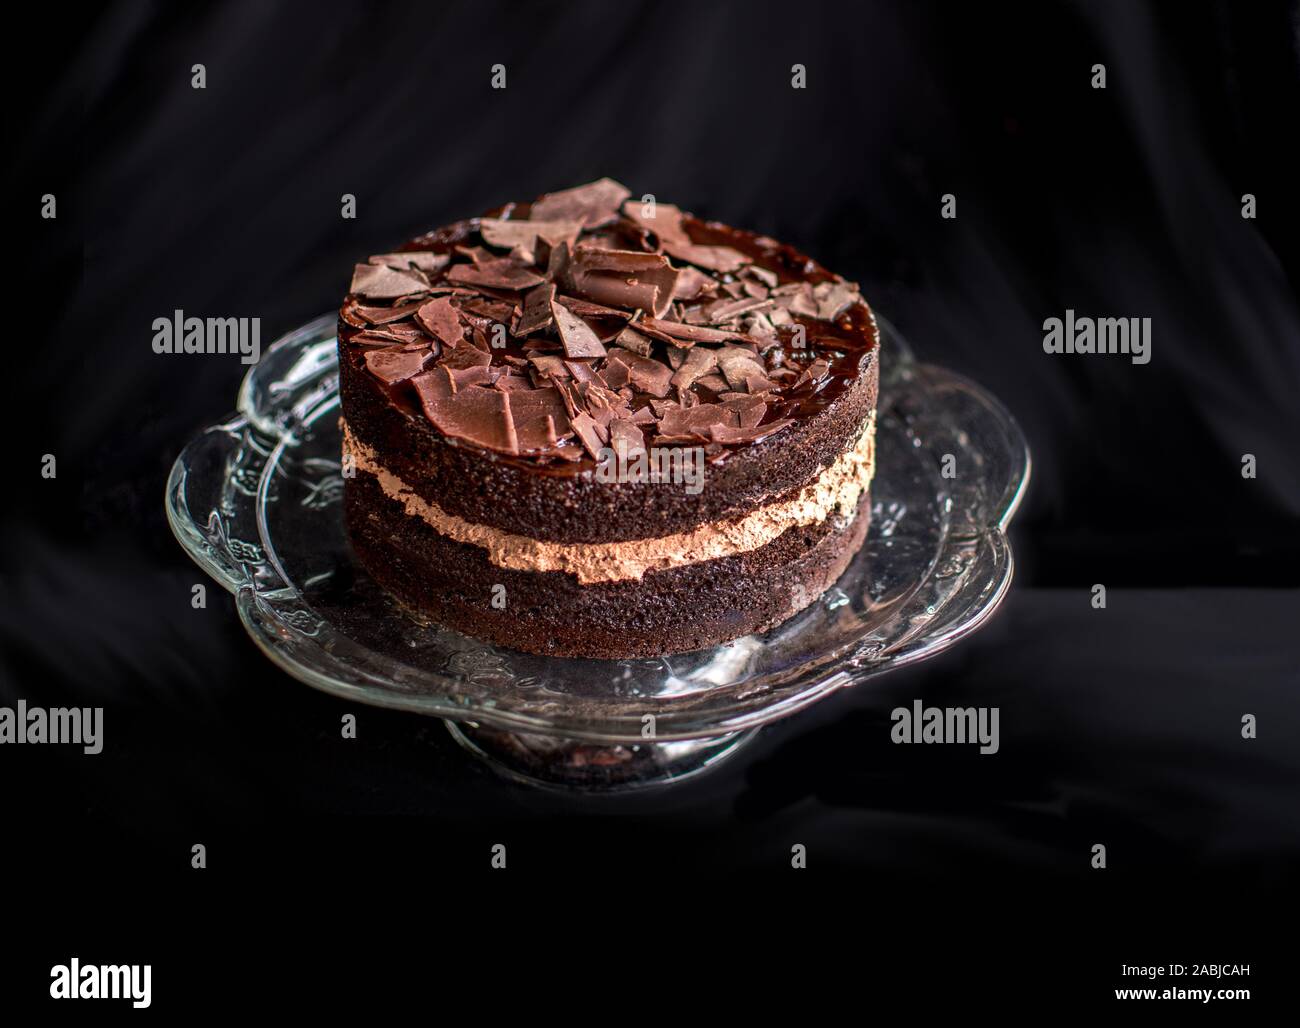 A delicious, two layered cake is decorated with a chocolate glaze ...